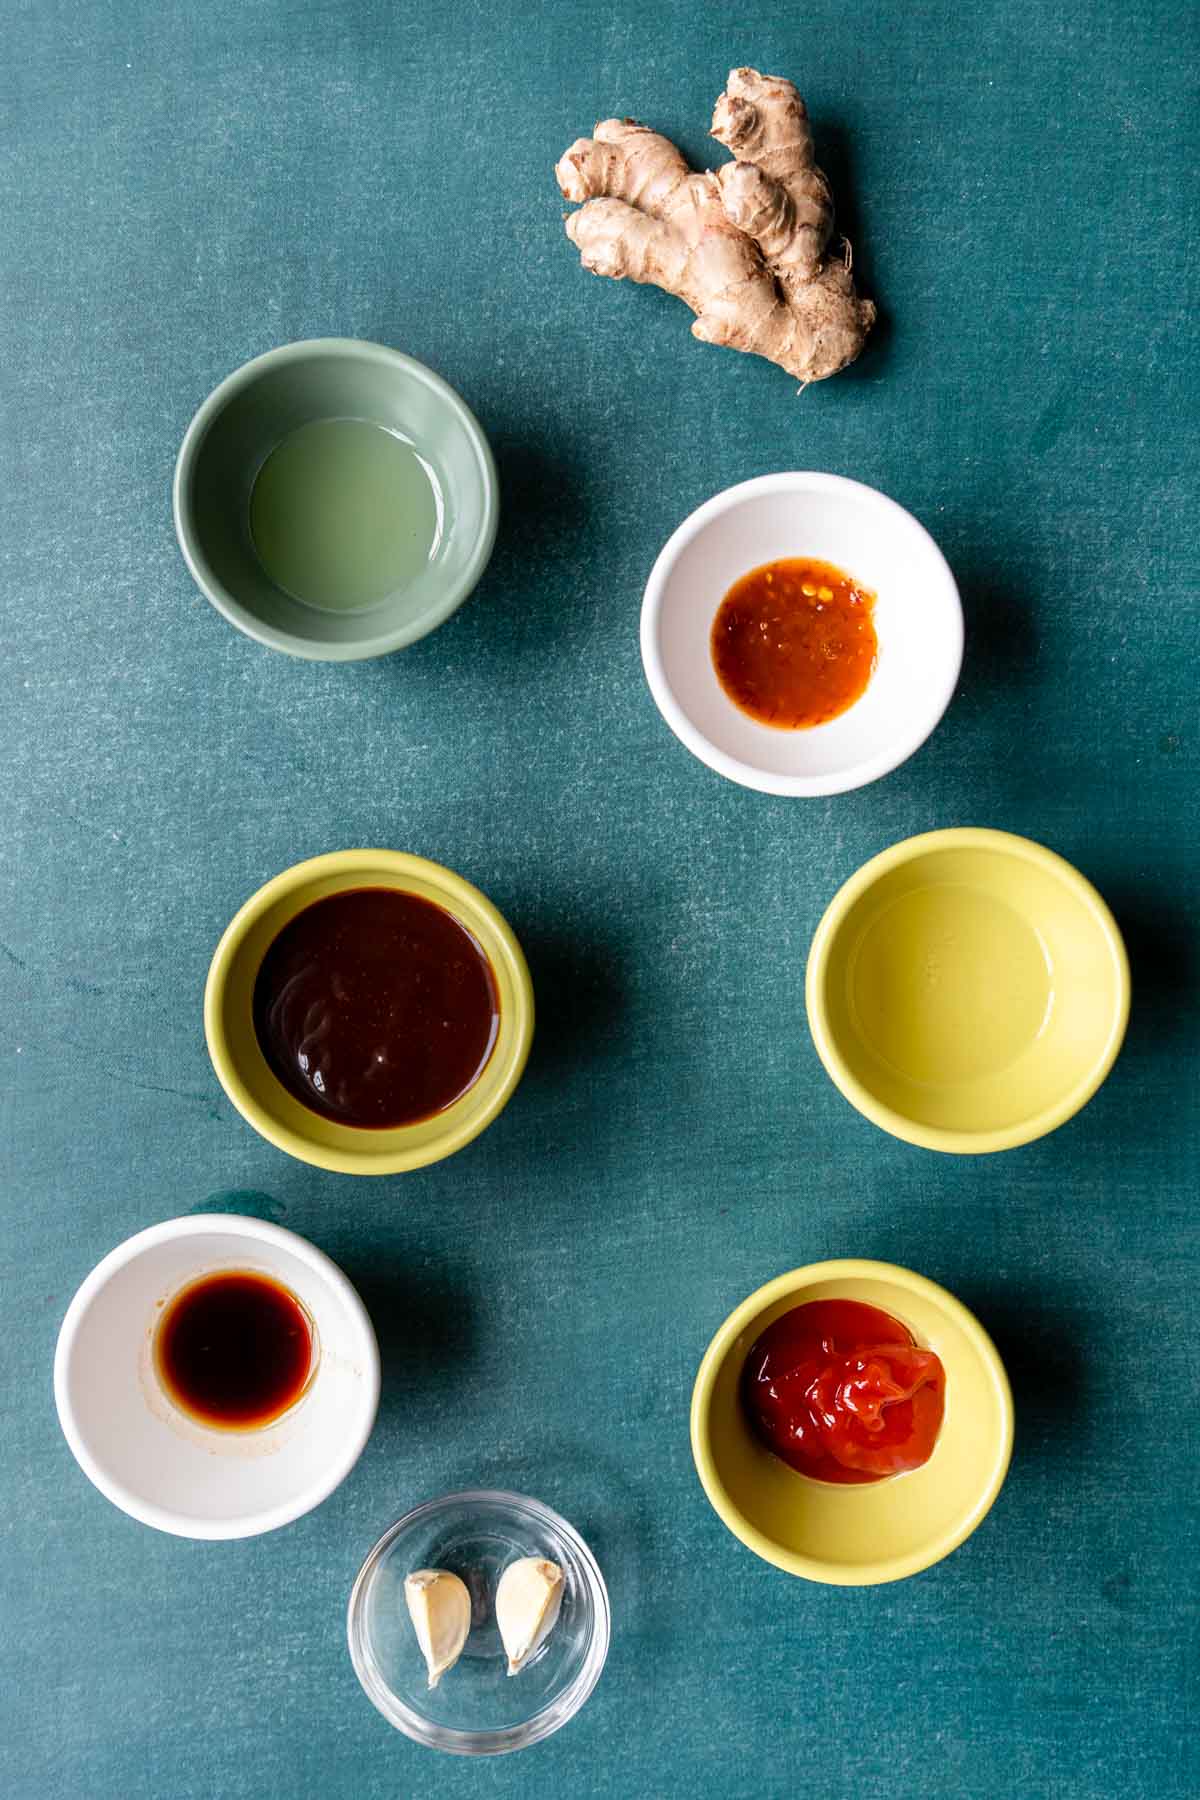 ingredients for the Hoisin Glaze on table in colorful bowls